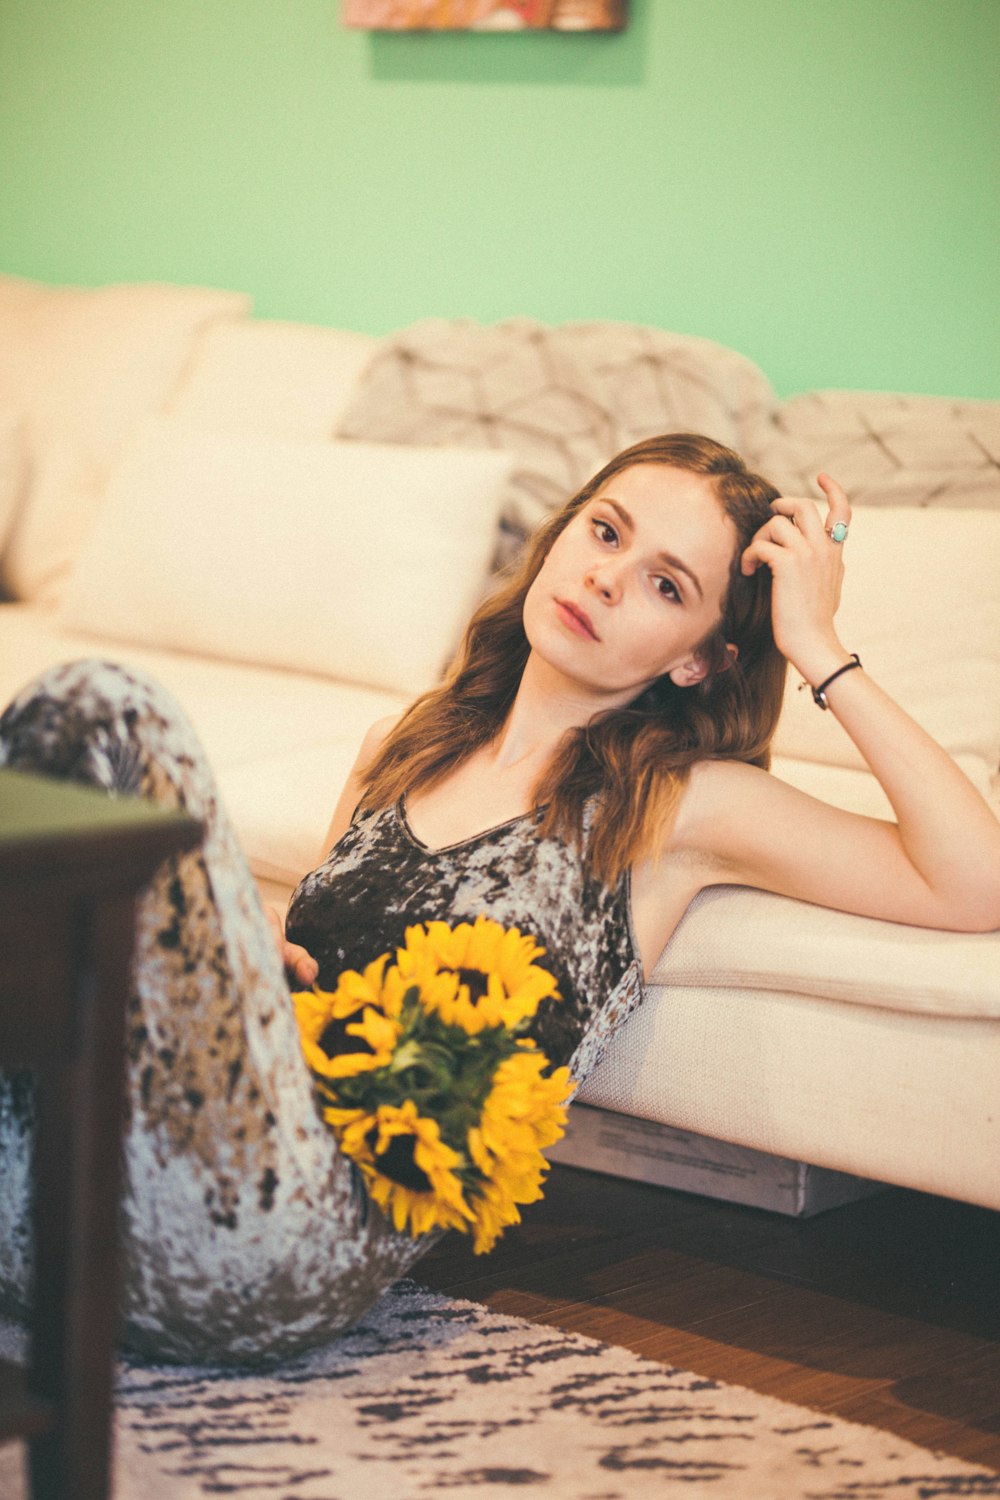 woman wearing grey and black tank top sitting on floor leaning on sofa while holding yellow sunflower